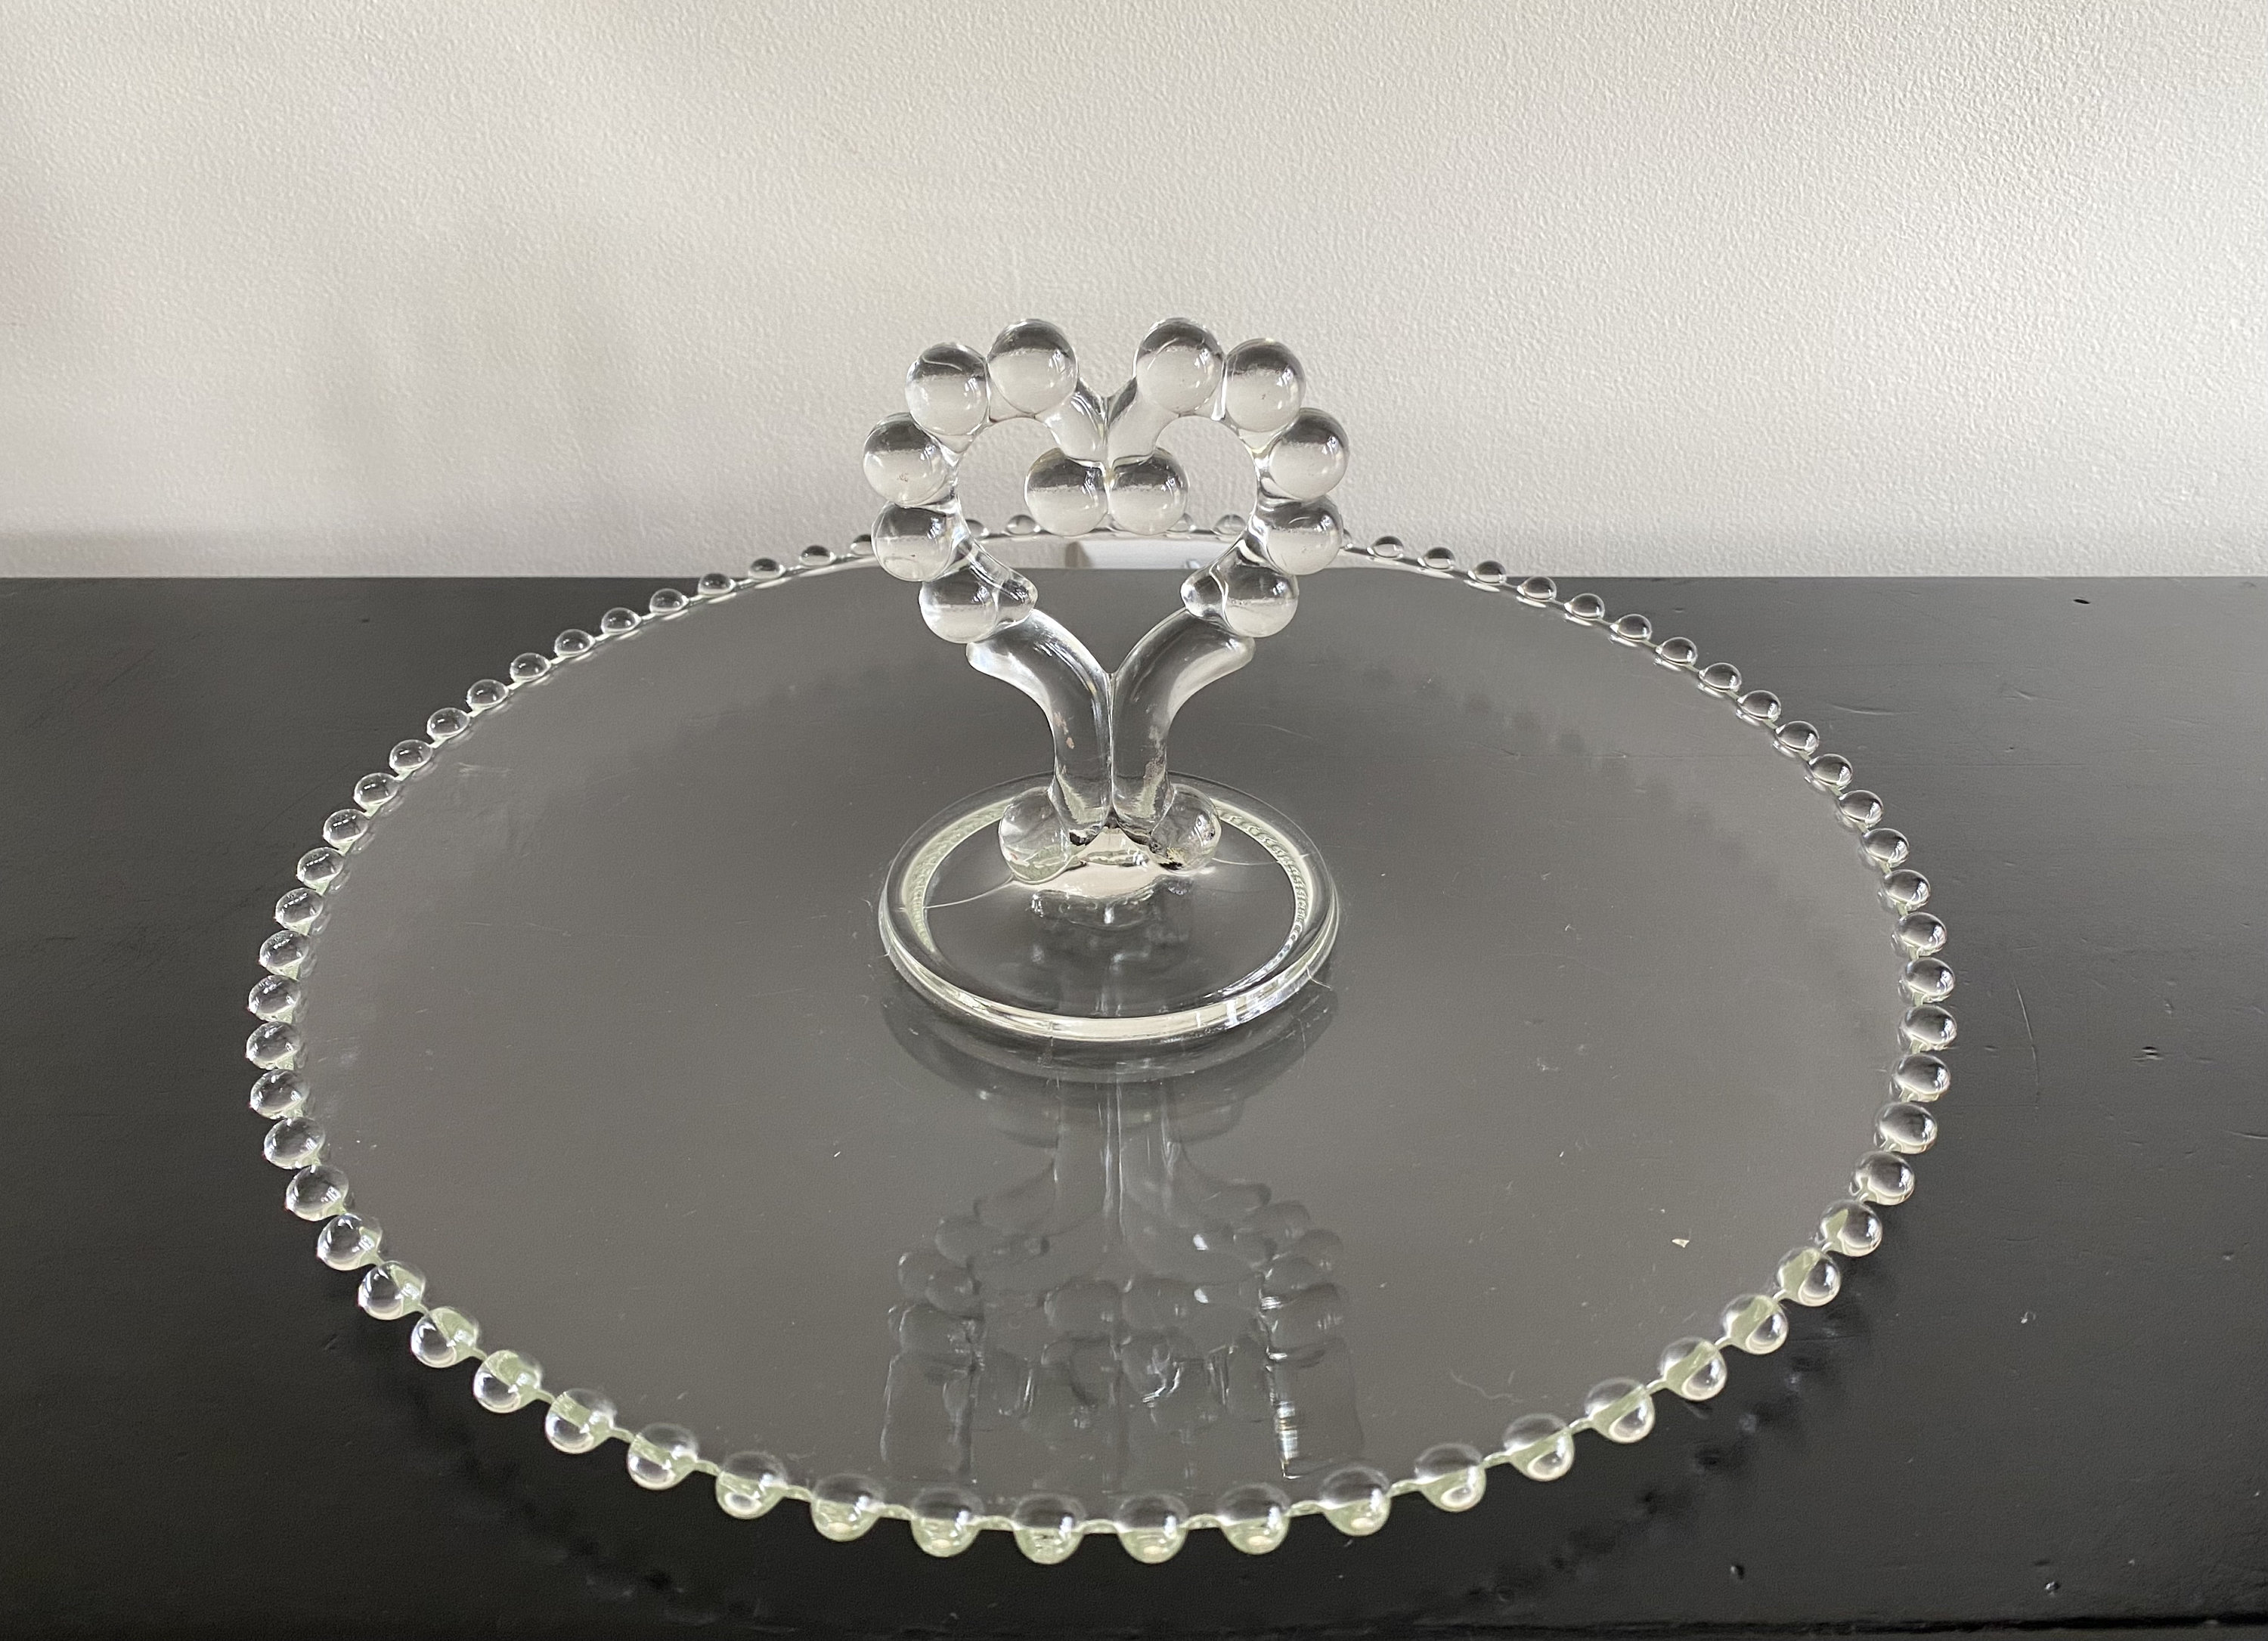 Small Trays Set in Antique Glass, Antique Wedding Favor, Crystal